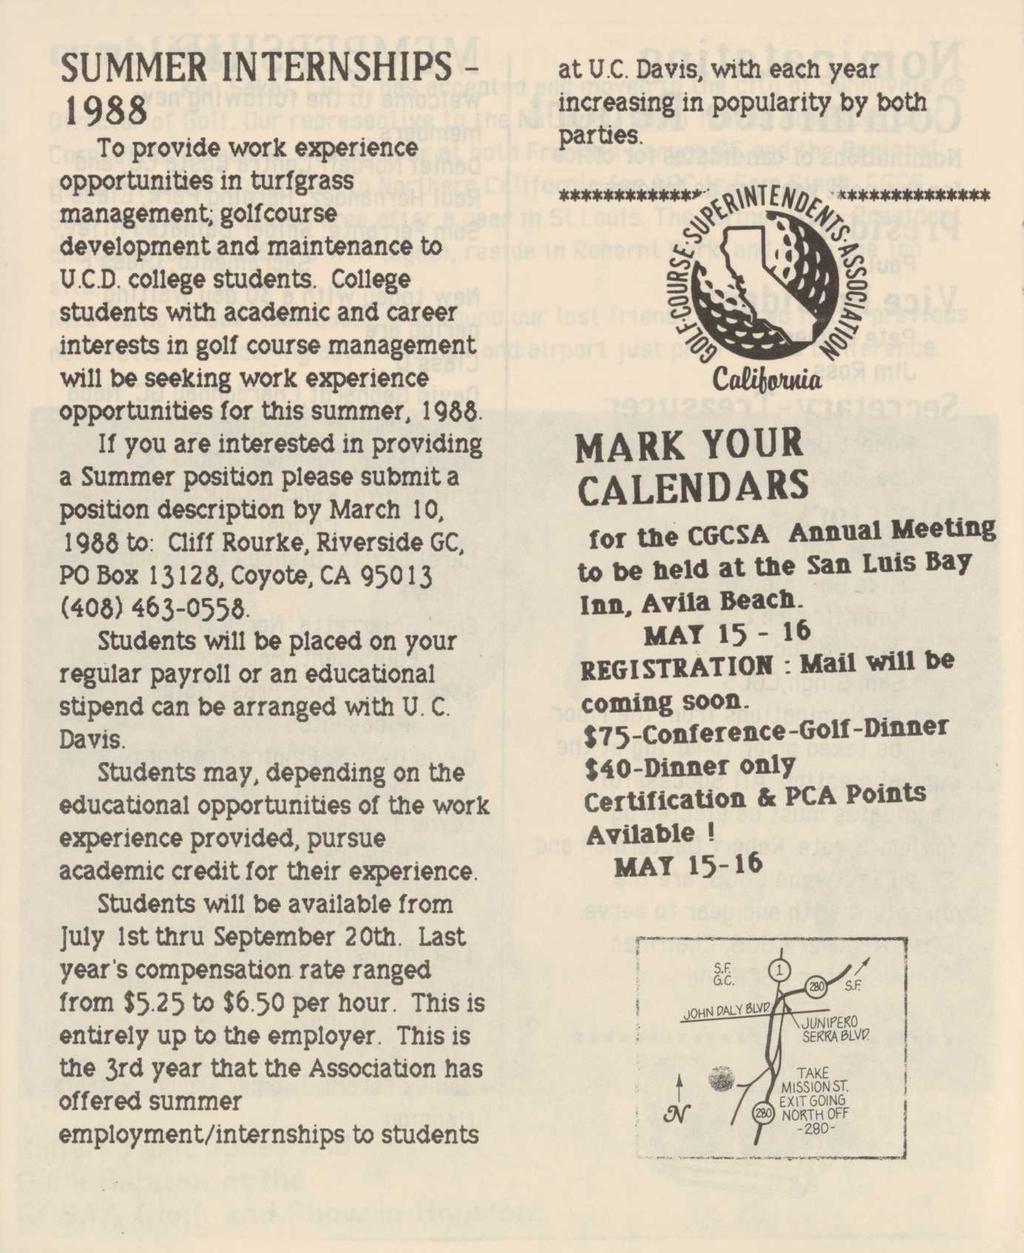 SUMMER INTERNSHIPS - 1988 To provide work experience opportunities in turfgrass management; golf course development and maintenance to U.C.D. college students.